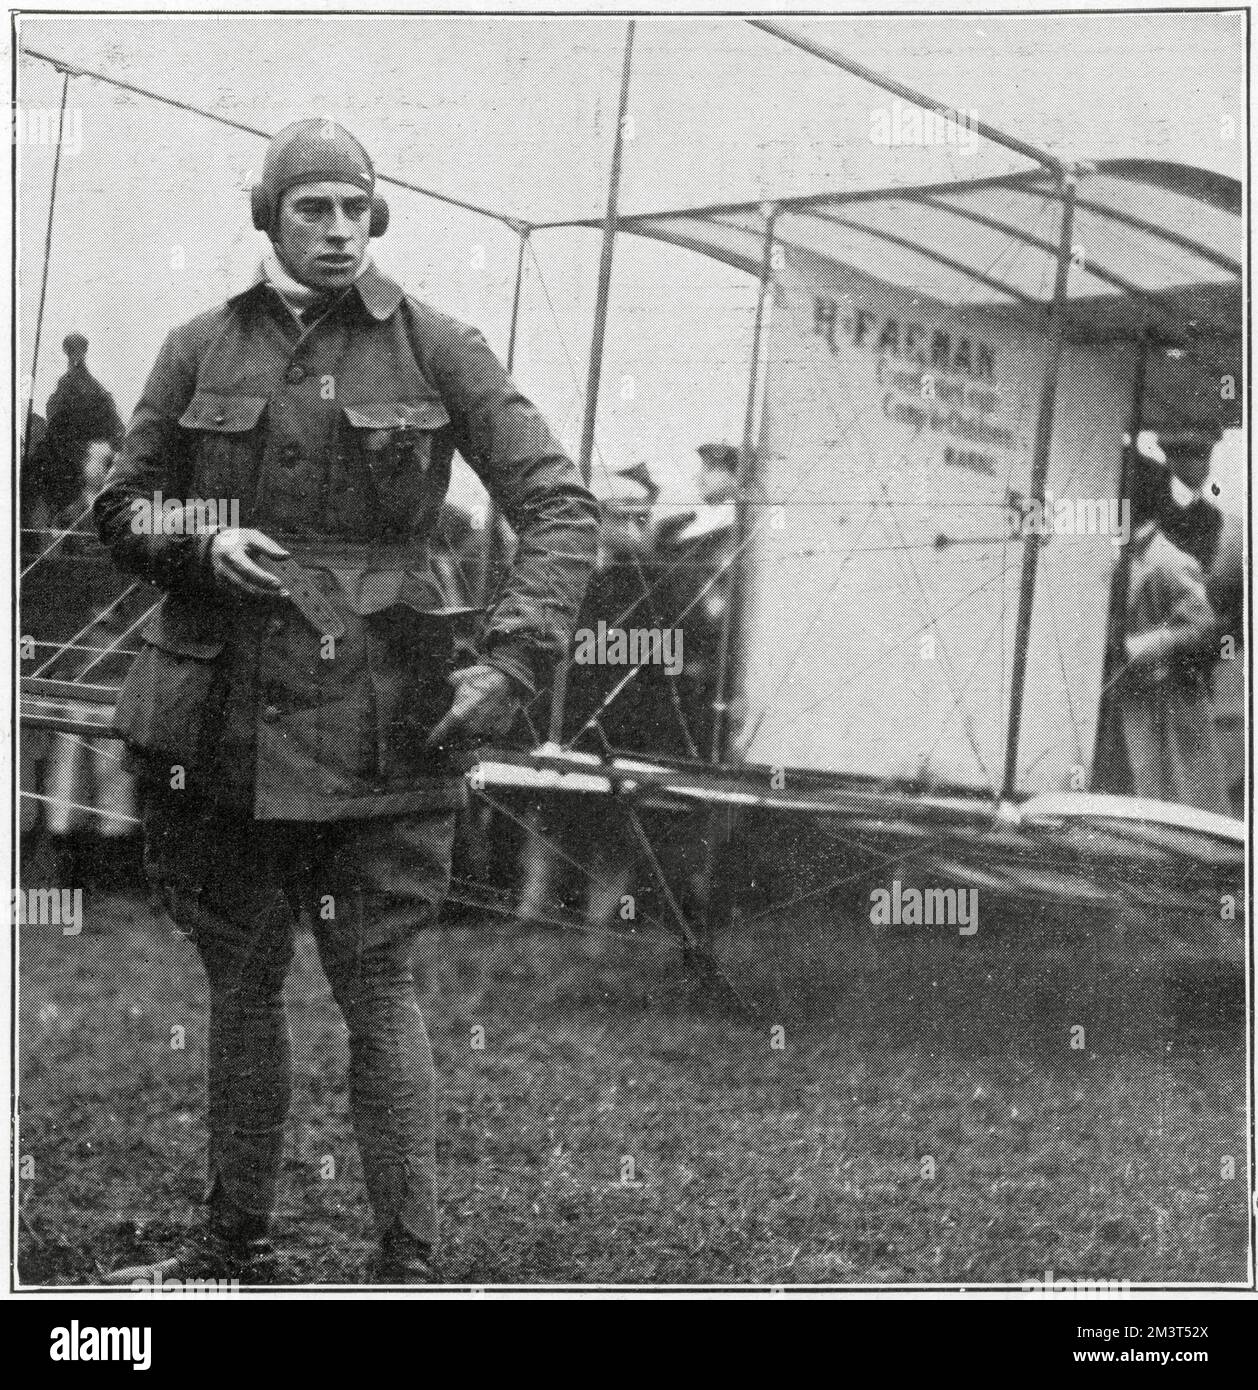 Claude Grahame-White (1879 - 1959), English pioneer of aviation. Photograph showing Grahame-White near Rugby. A 'Daily Mail' newspaper prize of £10,000 was up for offer from London to Manchester in under 24 hours. He covered 114 miles of the distance and then gave up due to engine troubles and high winds. Stock Photo